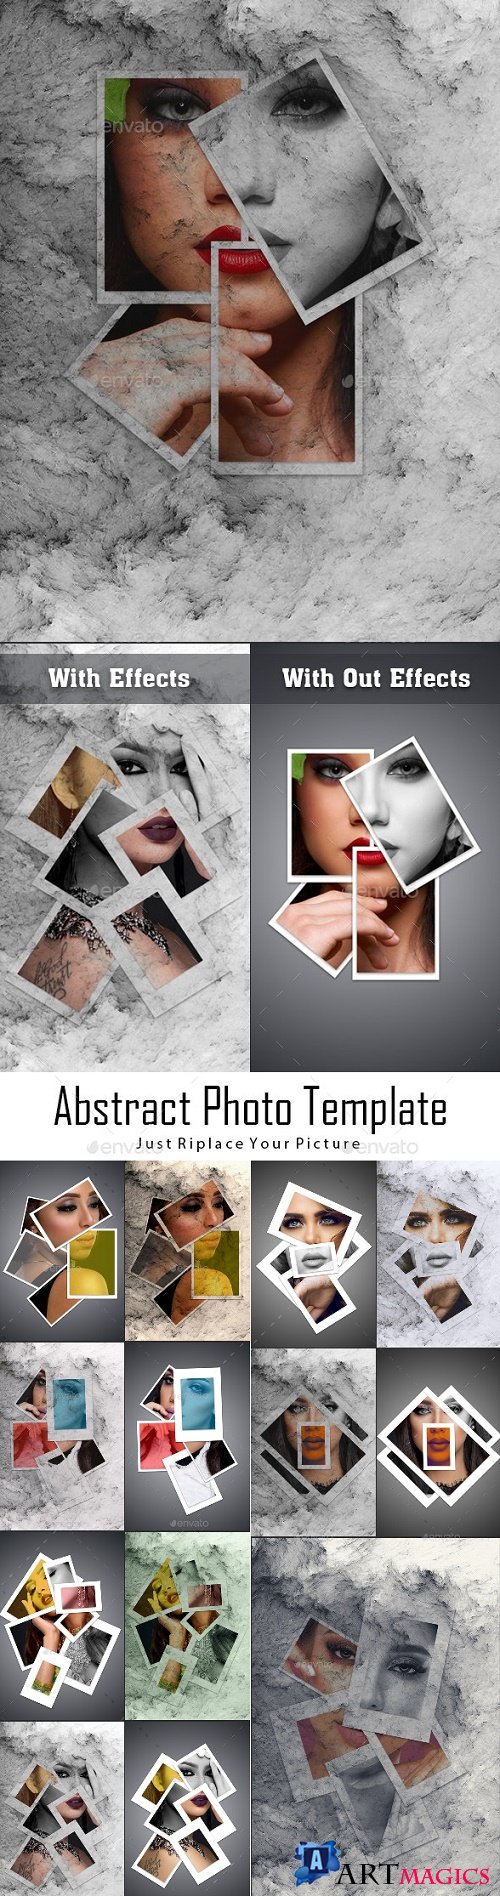 Abstract Photo Template 23805103